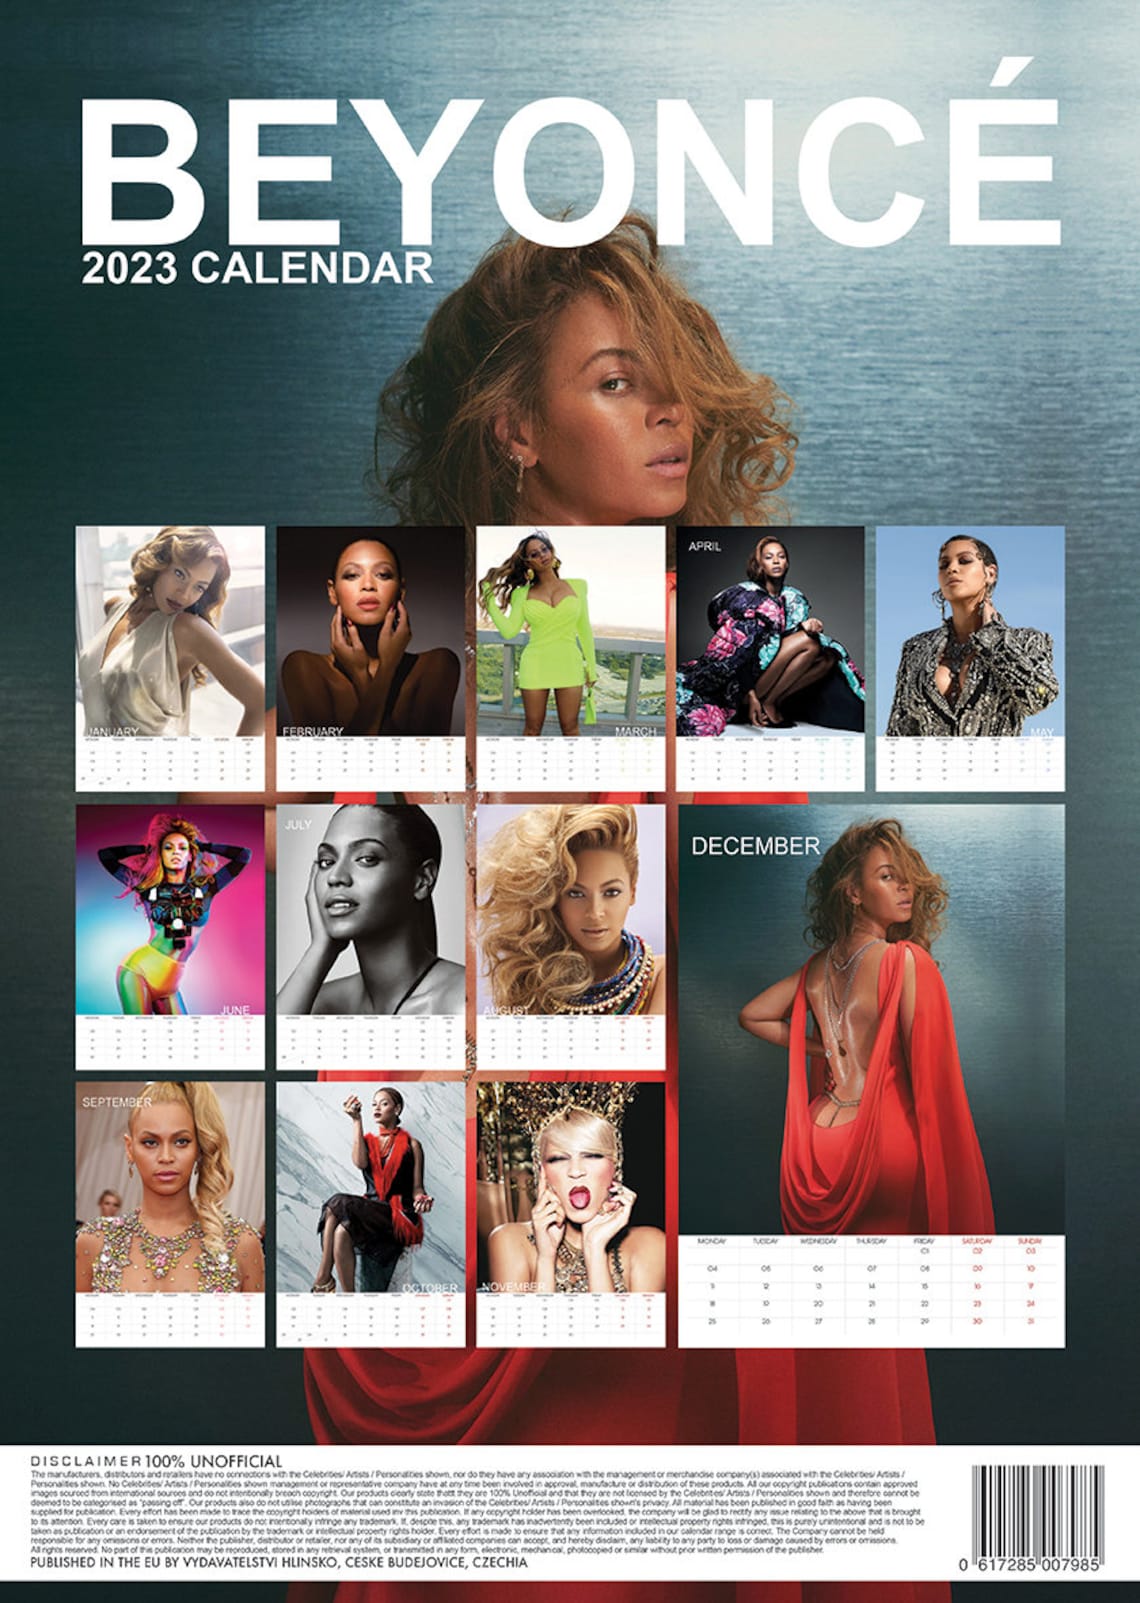 BEYONCE CALENDAR 2023 Large A3 Size Wall Calender New and Etsy